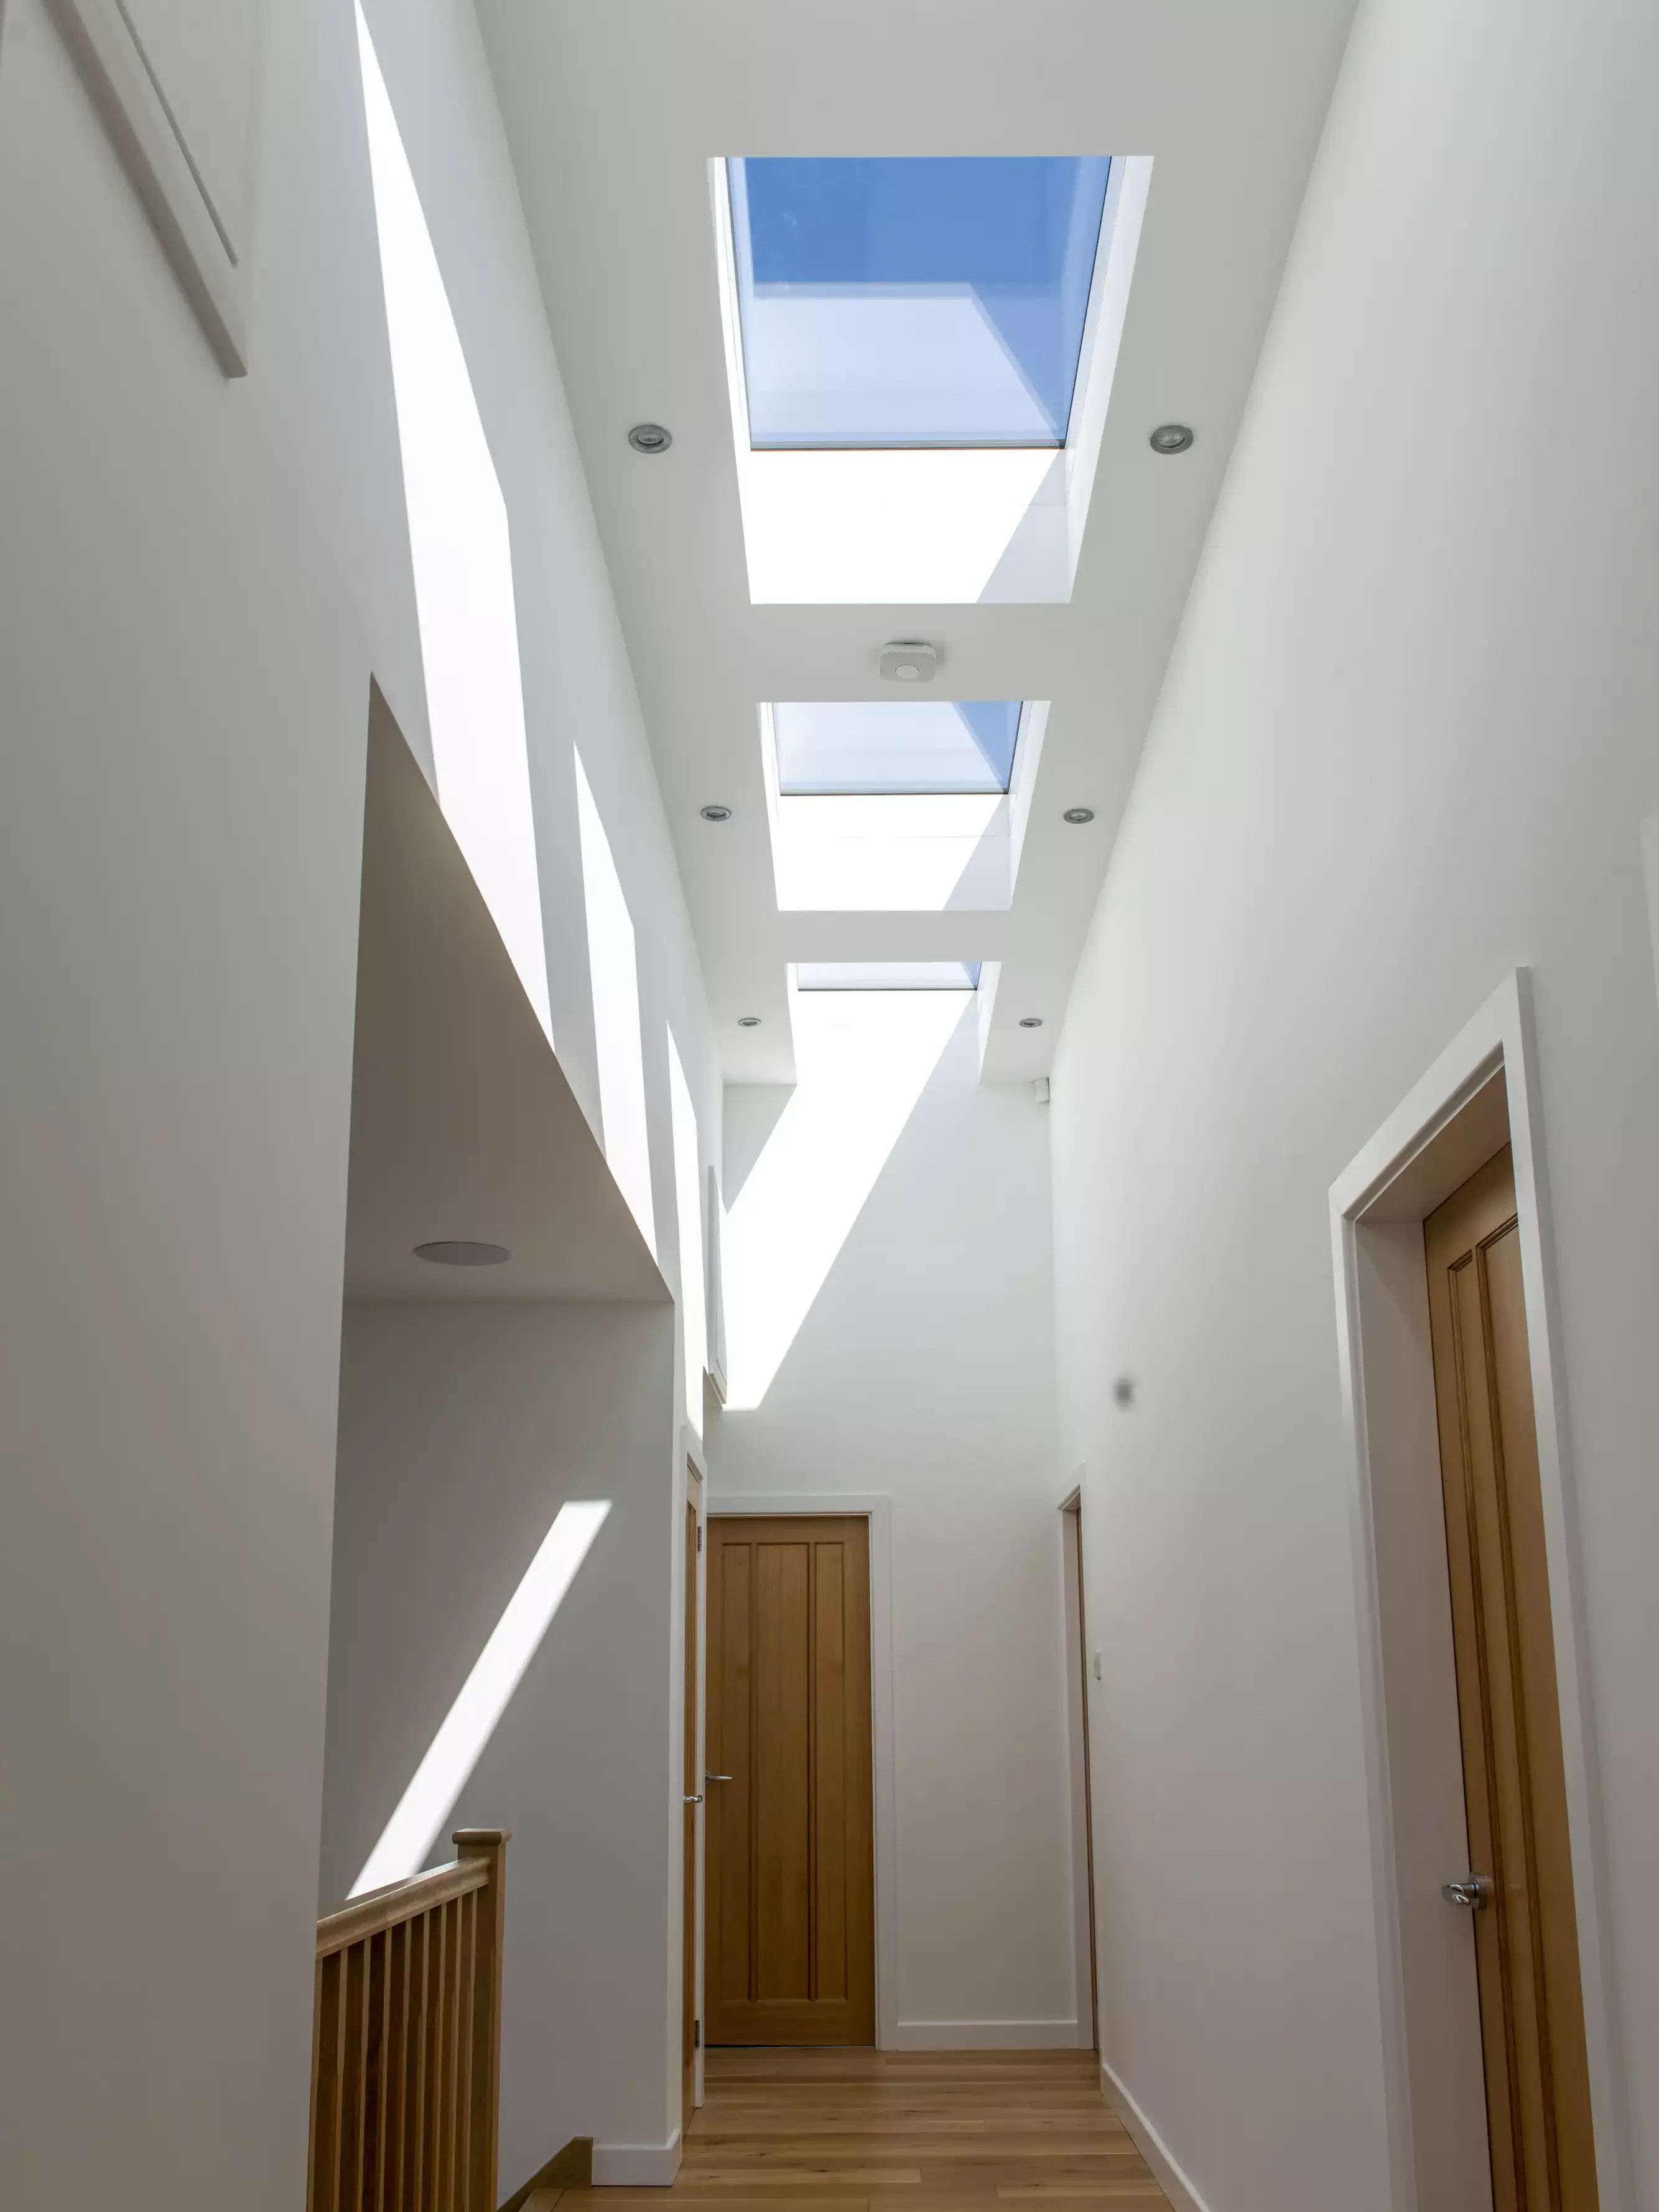 Modern corridor with natural lighting from VELUX roof windows, wooden floors, and minimalist design.